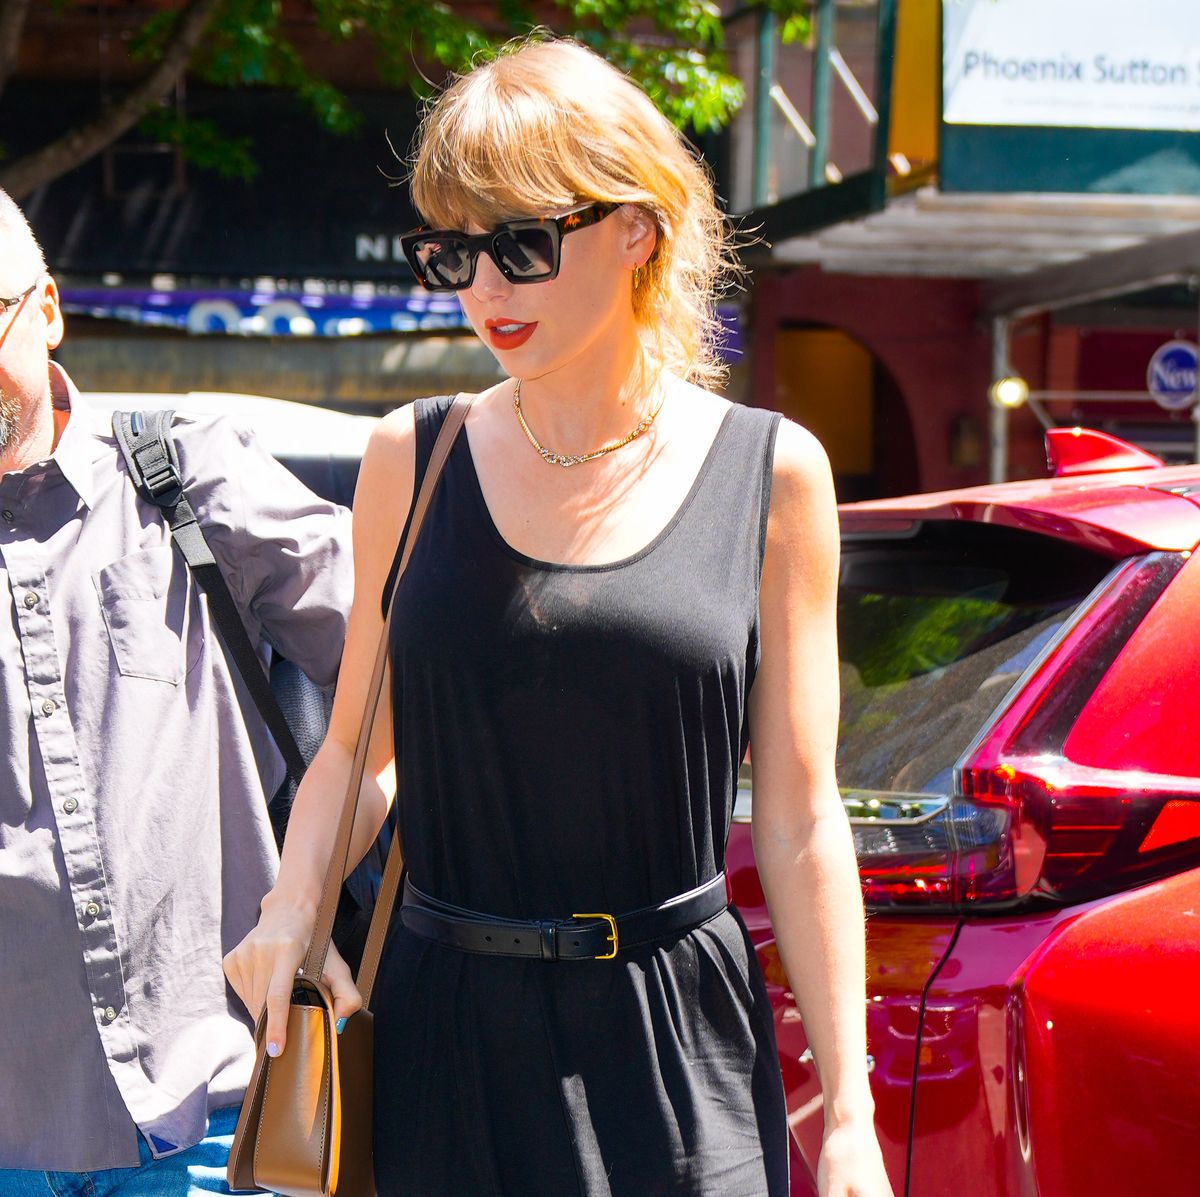 Taylor Swift: Singer Steps Out In Black Bra In New York City